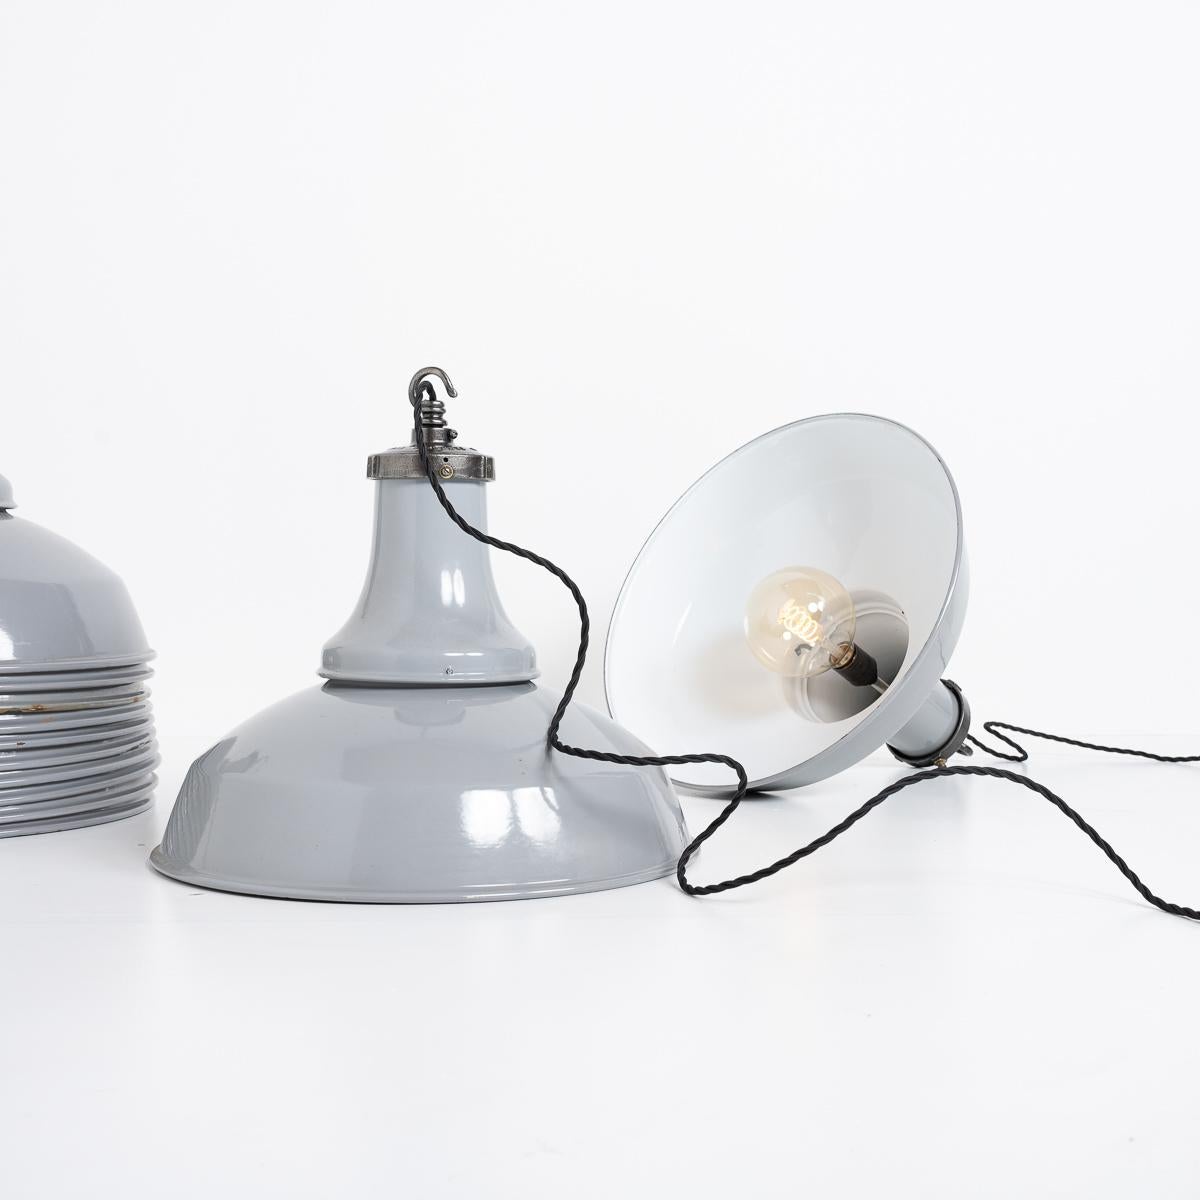 Reclaimed Industrial Vitreous Enamelled Pendant Lights by Benjamin Electric For Sale 1